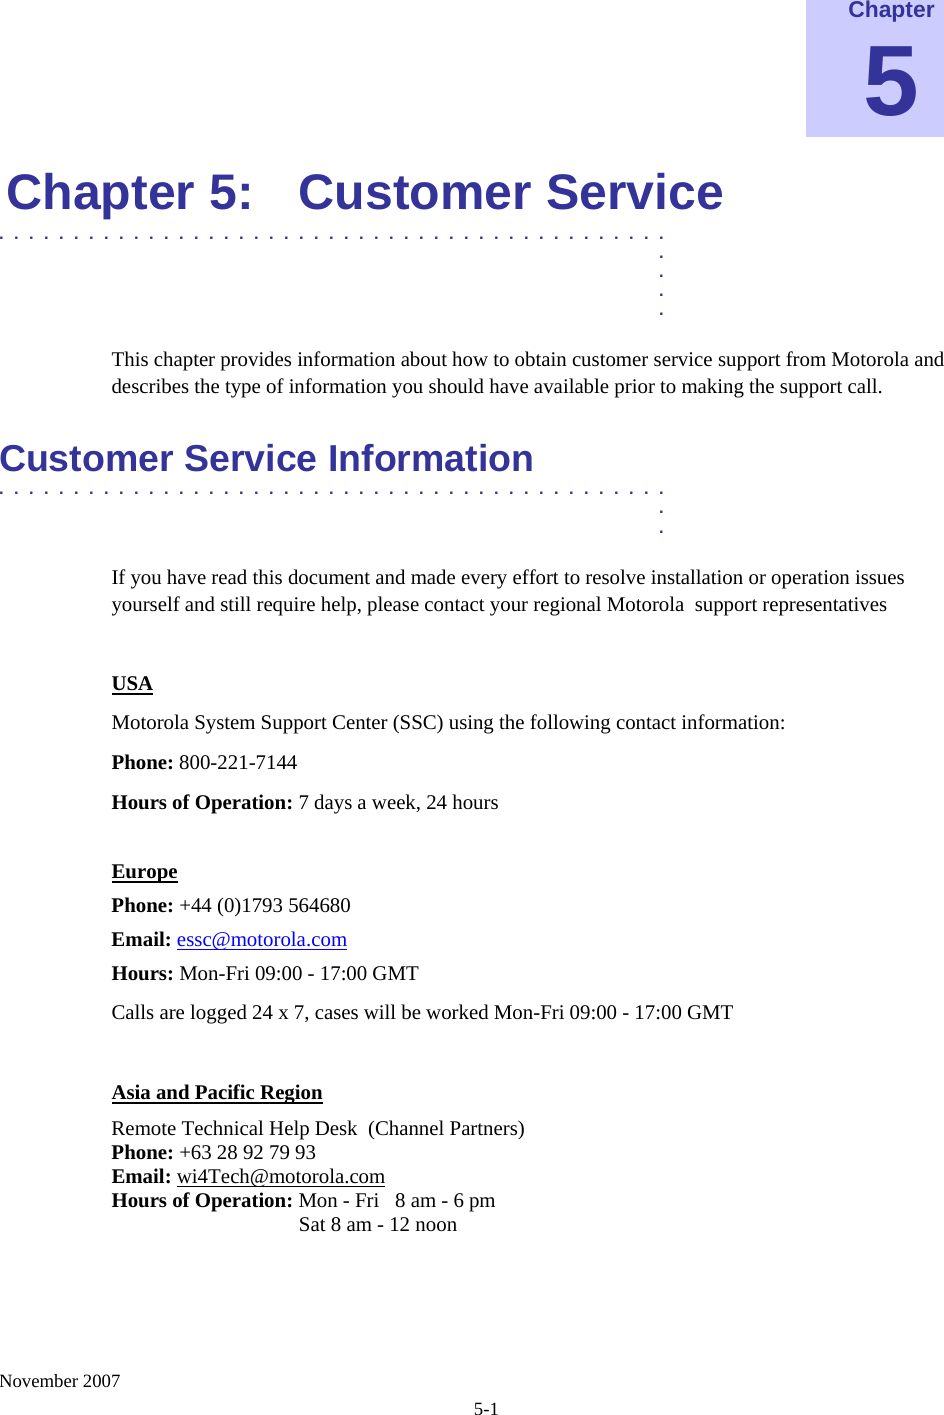    November 2007 5-1 Chapter 5 Chapter 5:  Customer Service .............................................  .  .  .  . This chapter provides information about how to obtain customer service support from Motorola and describes the type of information you should have available prior to making the support call. Customer Service Information .............................................  .  . If you have read this document and made every effort to resolve installation or operation issues yourself and still require help, please contact your regional Motorola  support representatives  USA Motorola System Support Center (SSC) using the following contact information: Phone: 800-221-7144 Hours of Operation: 7 days a week, 24 hours   Europe Phone: +44 (0)1793 564680 Email: essc@motorola.com Hours: Mon-Fri 09:00 - 17:00 GMT Calls are logged 24 x 7, cases will be worked Mon-Fri 09:00 - 17:00 GMT  Asia and Pacific Region Remote Technical Help Desk  (Channel Partners) Phone: +63 28 92 79 93 Email: wi4Tech@motorola.com Hours of Operation: Mon - Fri   8 am - 6 pm                      Sat 8 am - 12 noon   